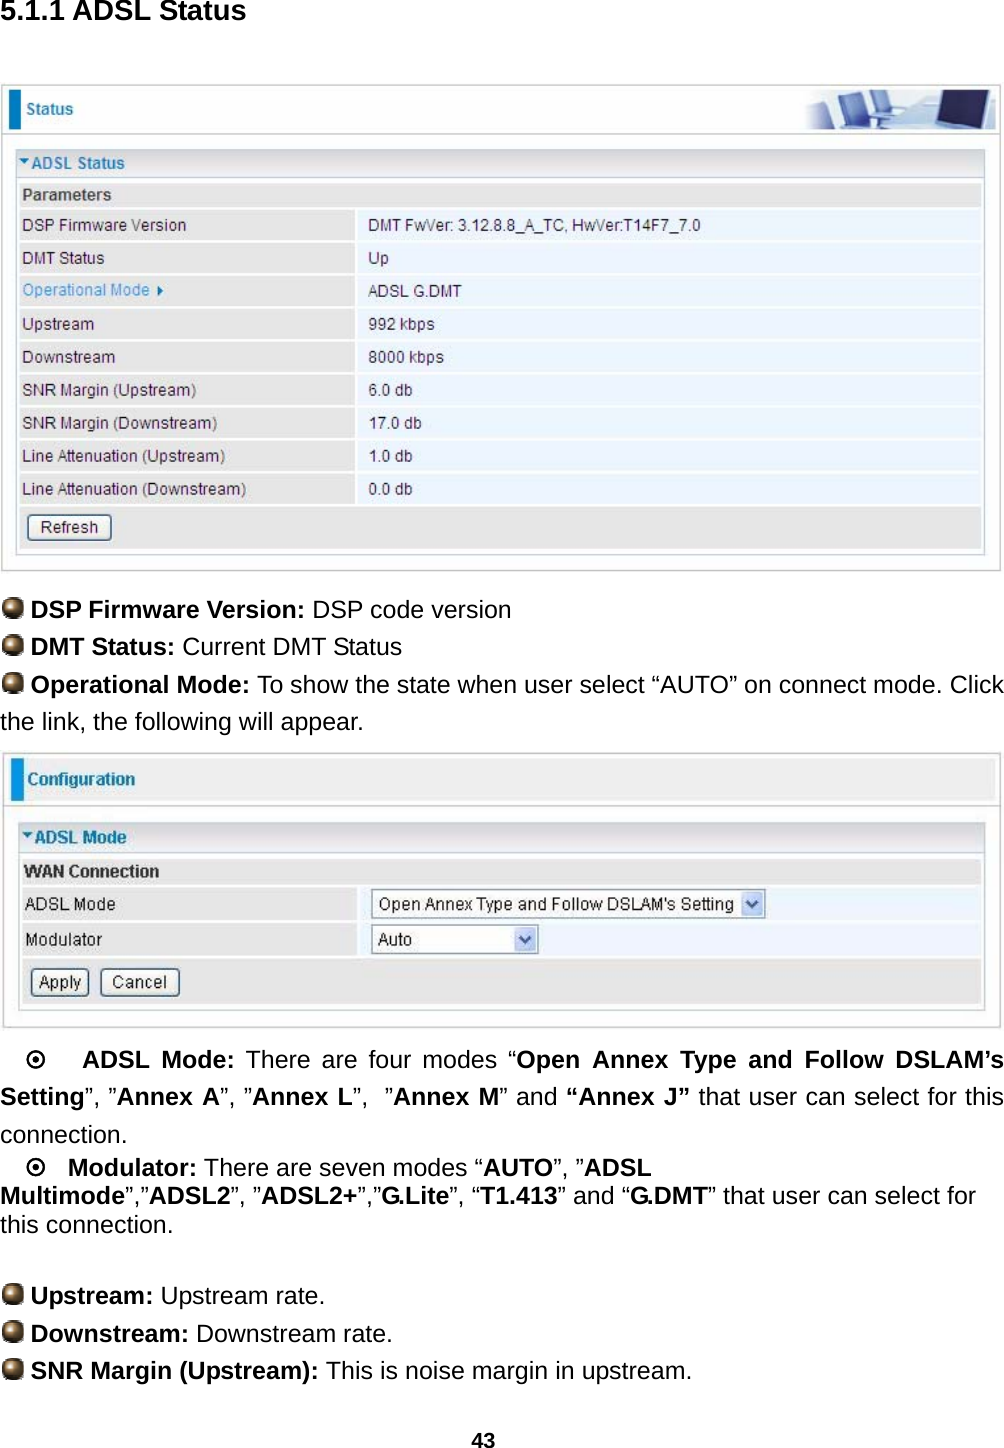 43 5.1.1 ADSL Status   DSP Firmware Version: DSP code version  DMT Status: Current DMT Status  Operational Mode: To show the state when user select “AUTO” on connect mode. Click the link, the following will appear.  ~   ADSL Mode: There are four modes “Open Annex Type and Follow DSLAM’s Setting”, ”Annex A”, ”Annex L”,  ”Annex M” and “Annex J” that user can select for this connection. ~   Modulator: There are seven modes “AUTO”, ”ADSL Multimode”,”ADSL2”, ”ADSL2+”,”G.Lite”, “T1.413” and “G.DMT” that user can select for this connection.   Upstream: Upstream rate.  Downstream: Downstream rate.  SNR Margin (Upstream): This is noise margin in upstream. 